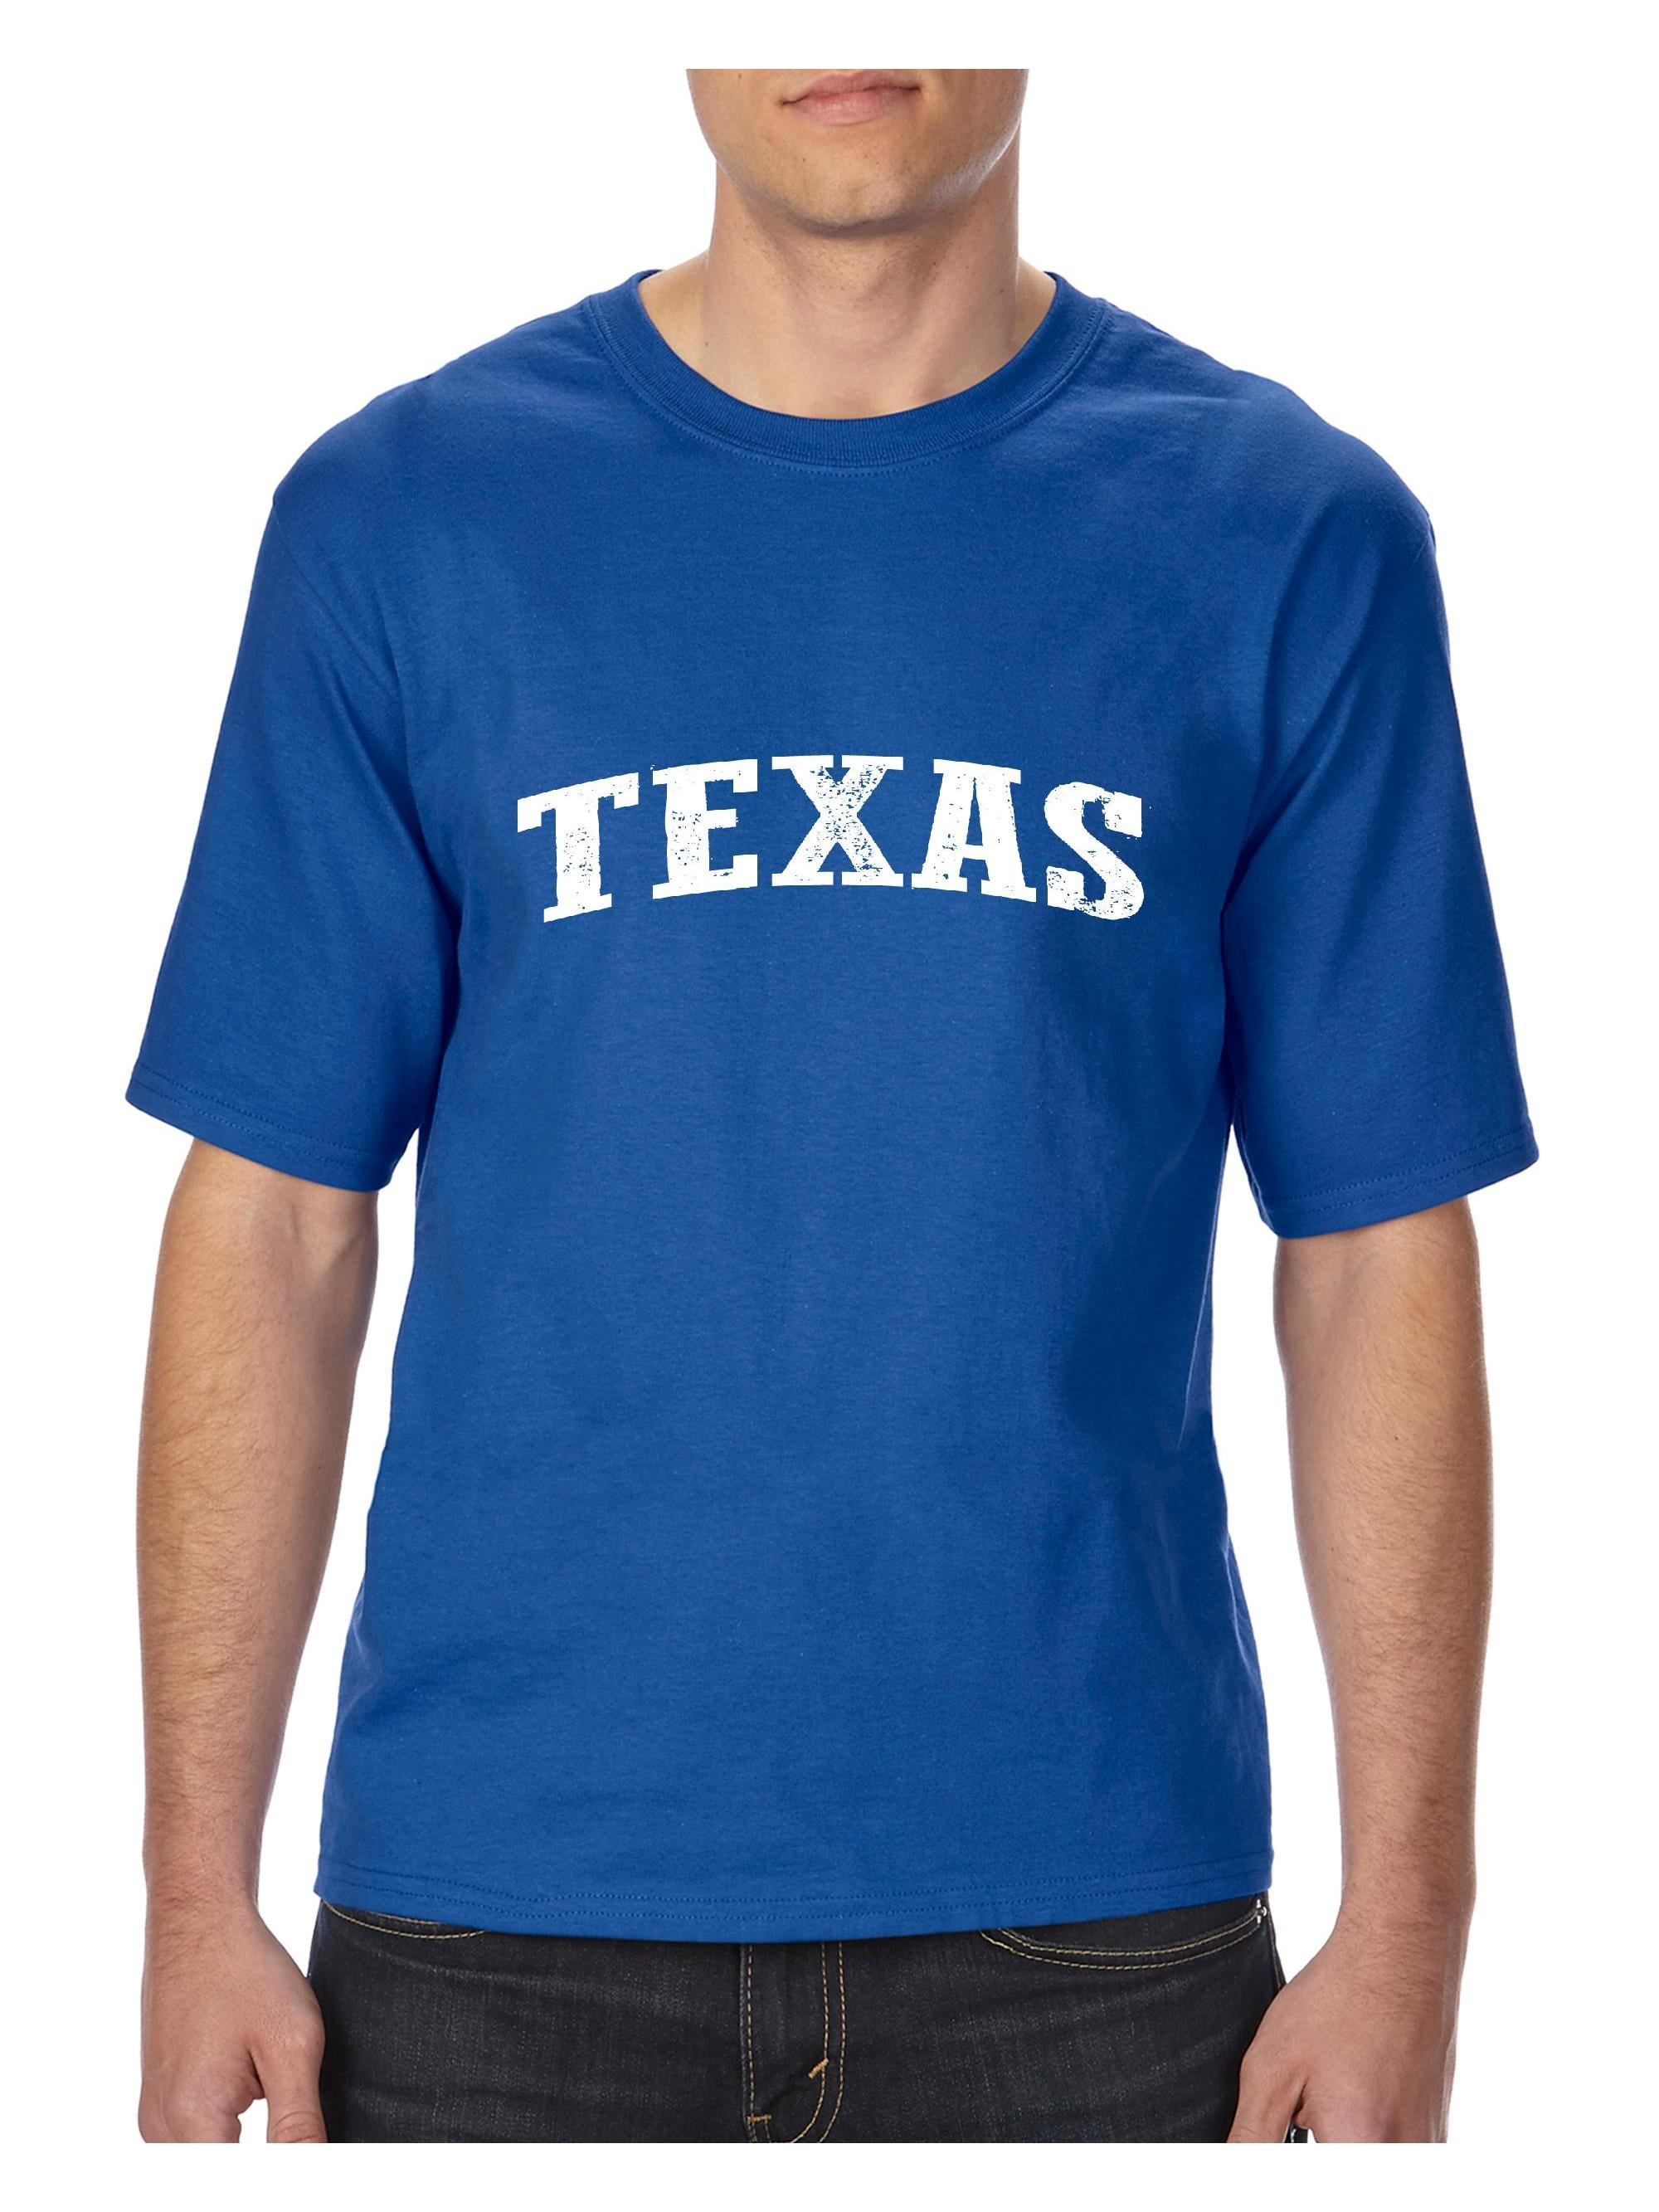 Mom's Favorite - Mens and Big Mens TX Texas Flag T-Shirt, up to size ...